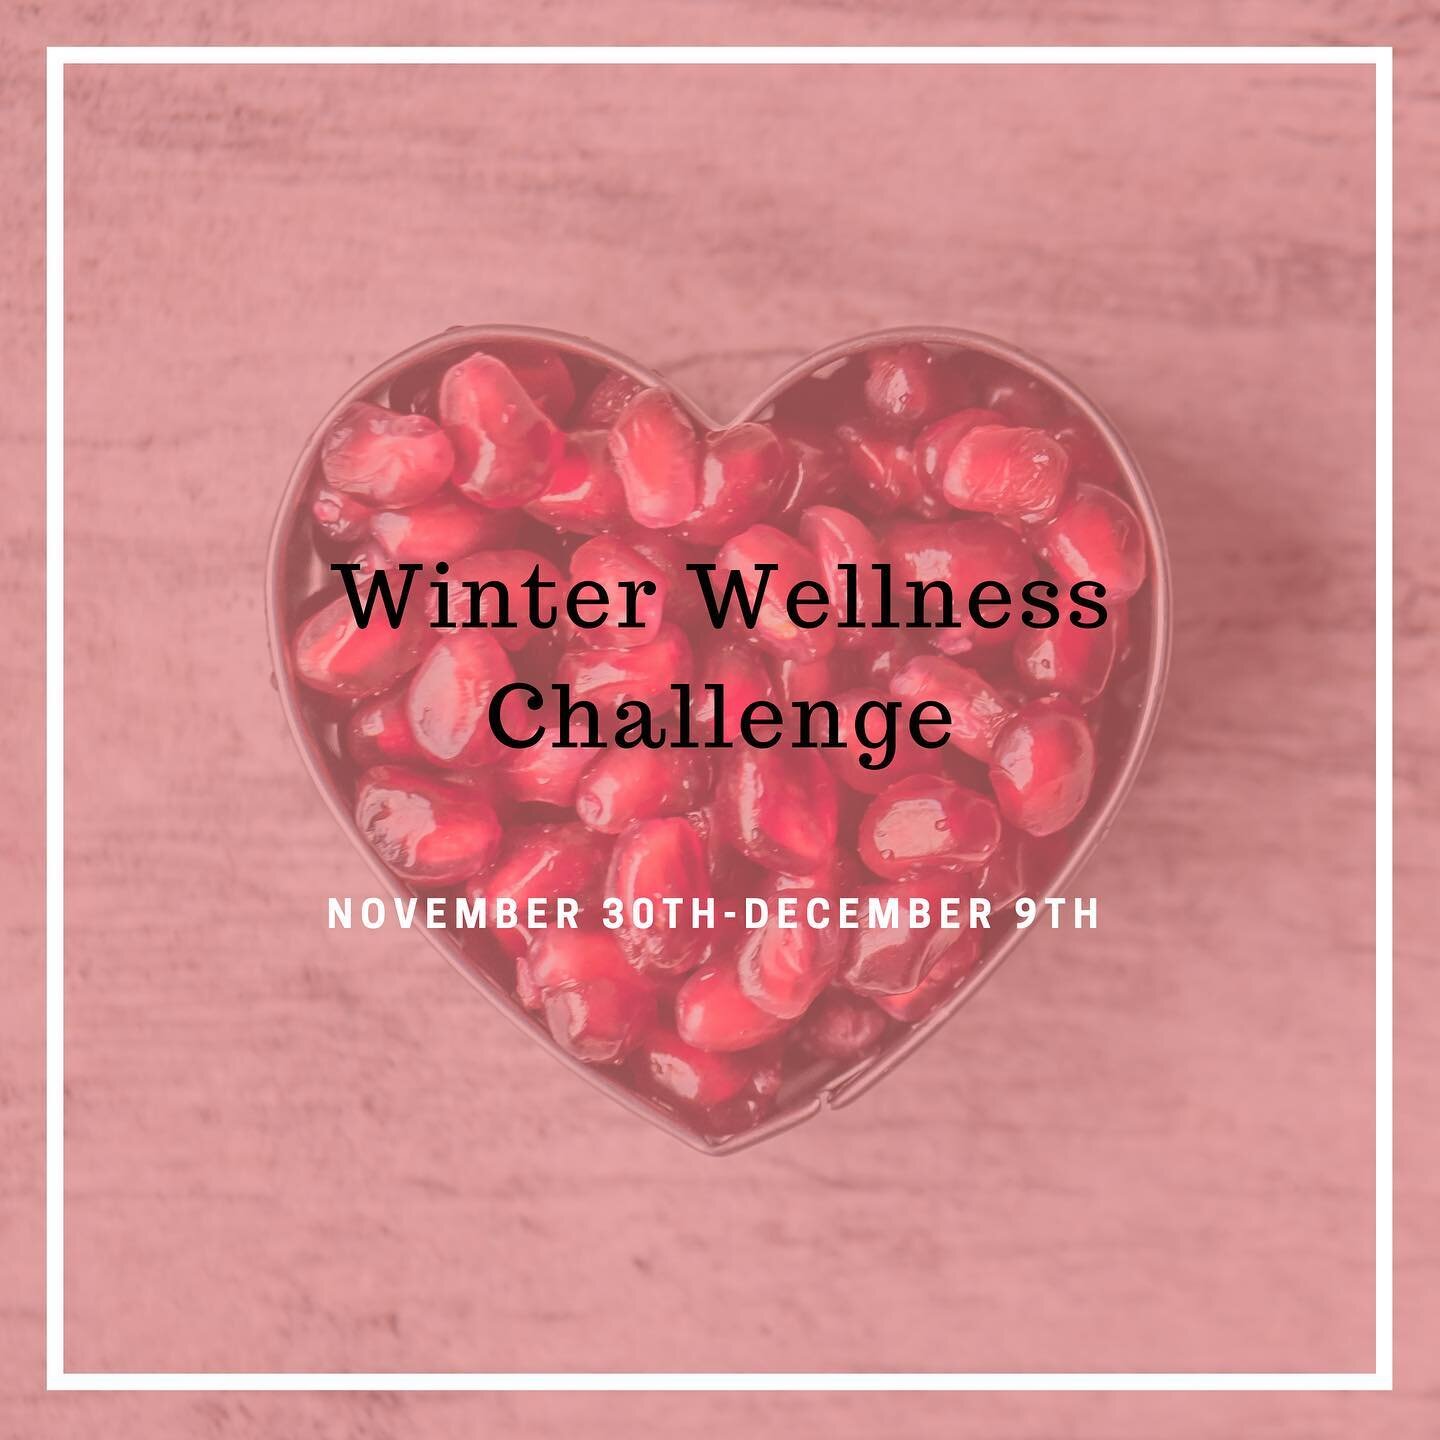 November 30th-December 9th Mary will be hosting a Winter Wellness Challenge. Over the 10 day challenge, you will gain knowledge surrounding goal setting, healthy lifestyle habits, and nutrition education. If you sign up for the challenge you can rece